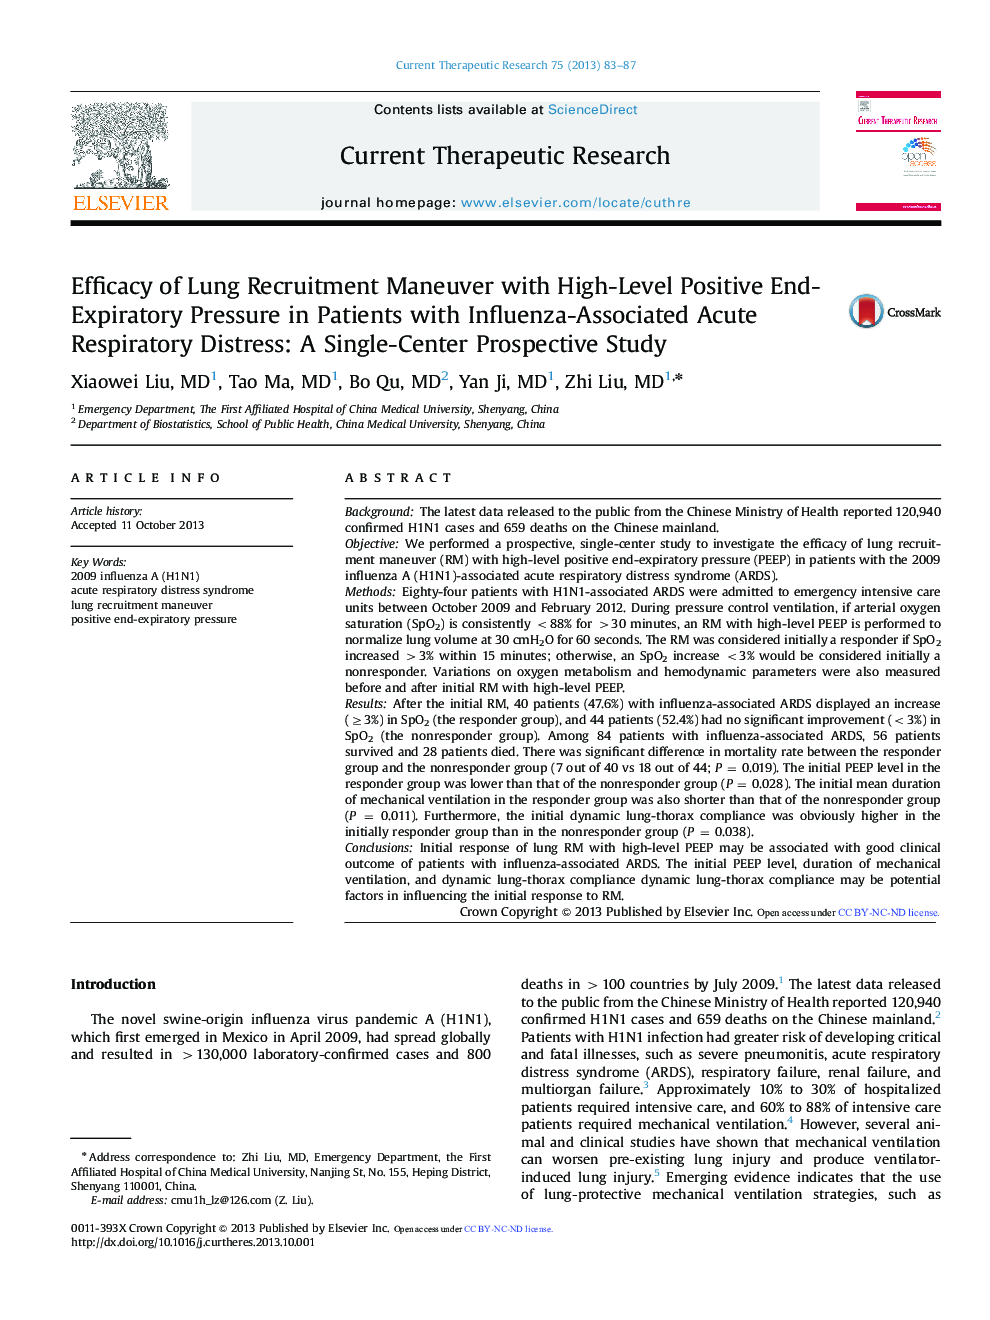 Efficacy of Lung Recruitment Maneuver with High-Level Positive End-Expiratory Pressure in Patients with Influenza-Associated Acute Respiratory Distress: A Single-Center Prospective Study